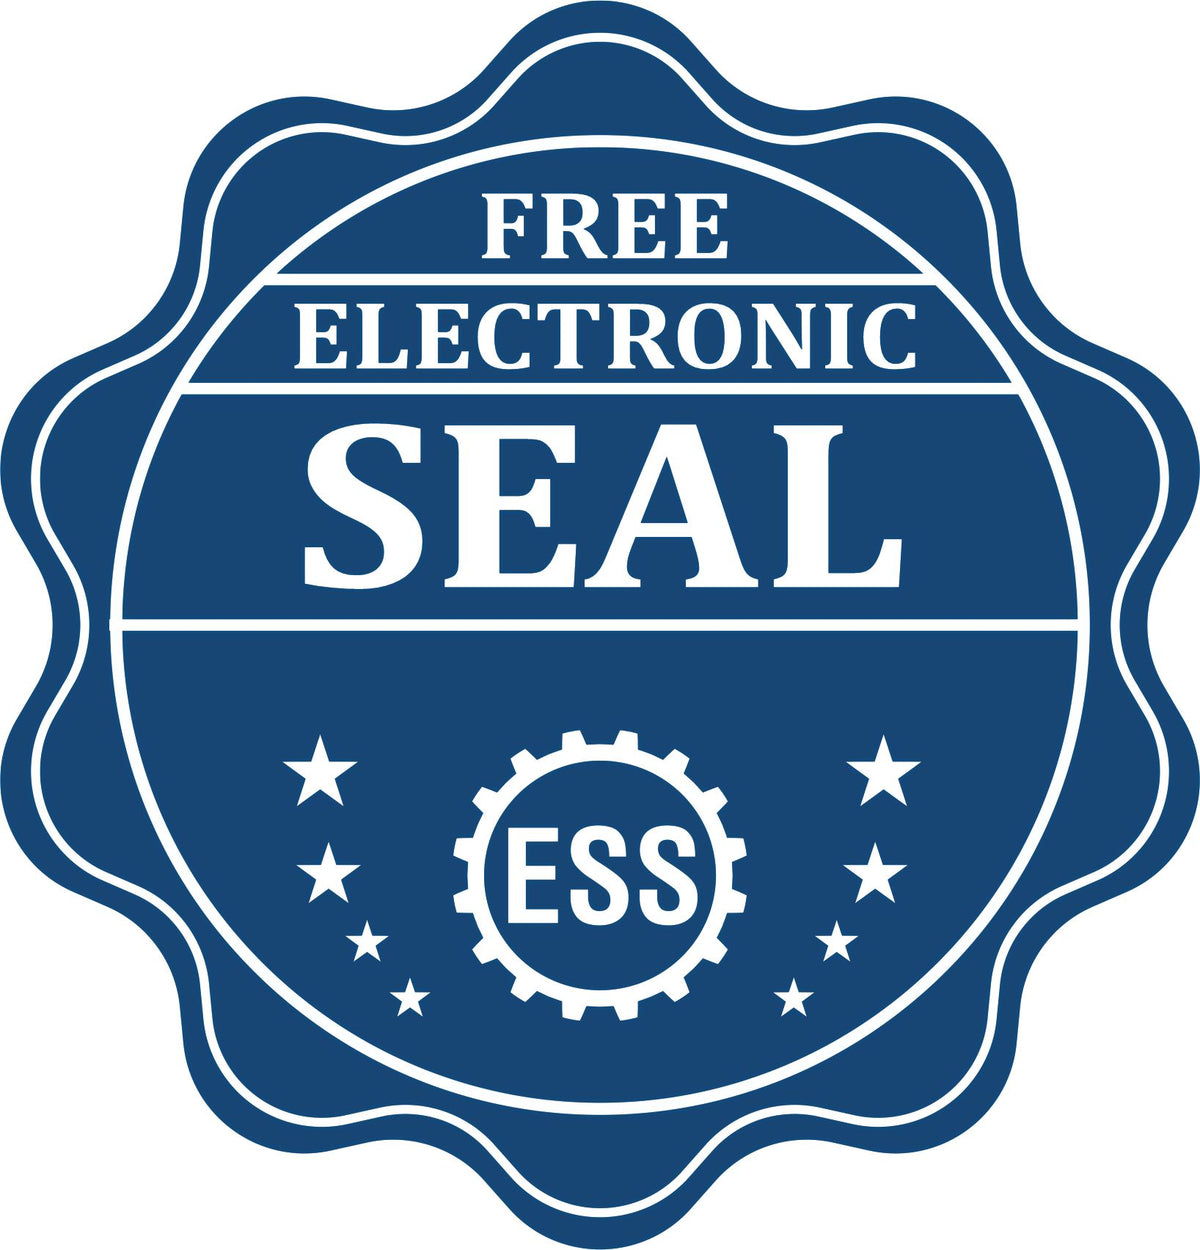 A badge showing a free electronic seal for the Connecticut Geologist Desk Seal with stars and the ESS gear on the emblem.